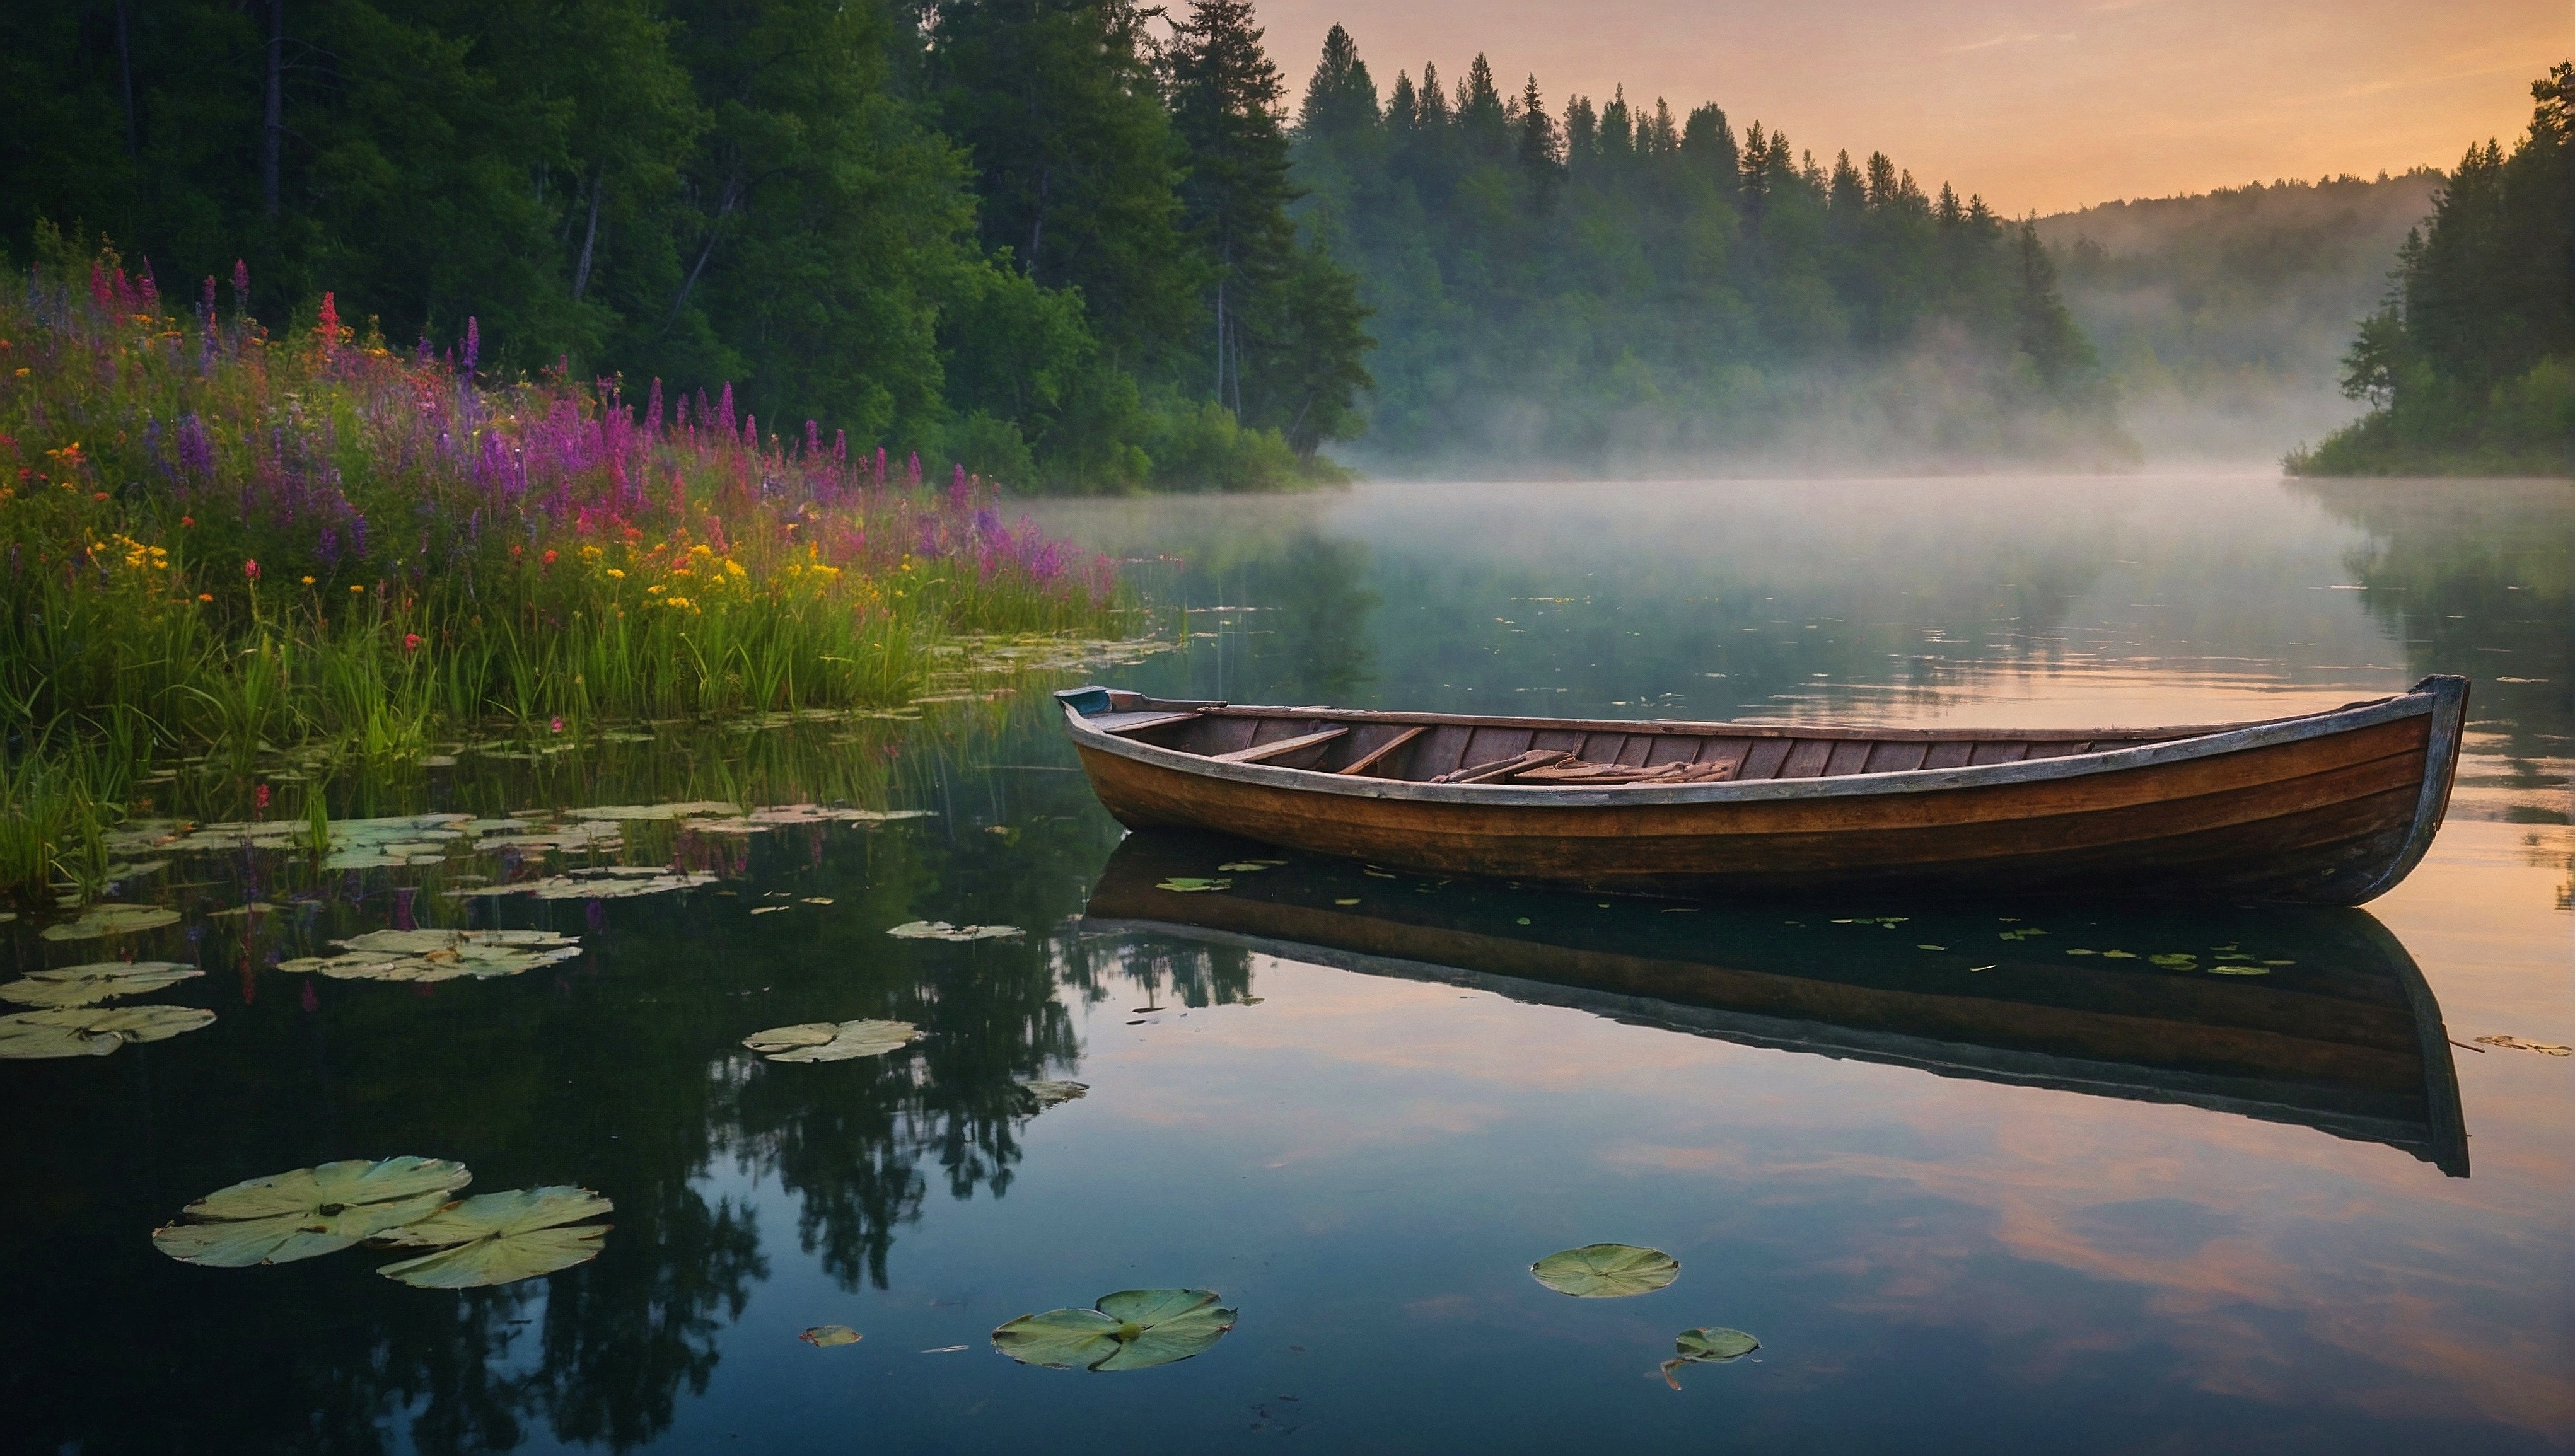 Free photo A wooden boat floating on top of a lake surrounded by trees